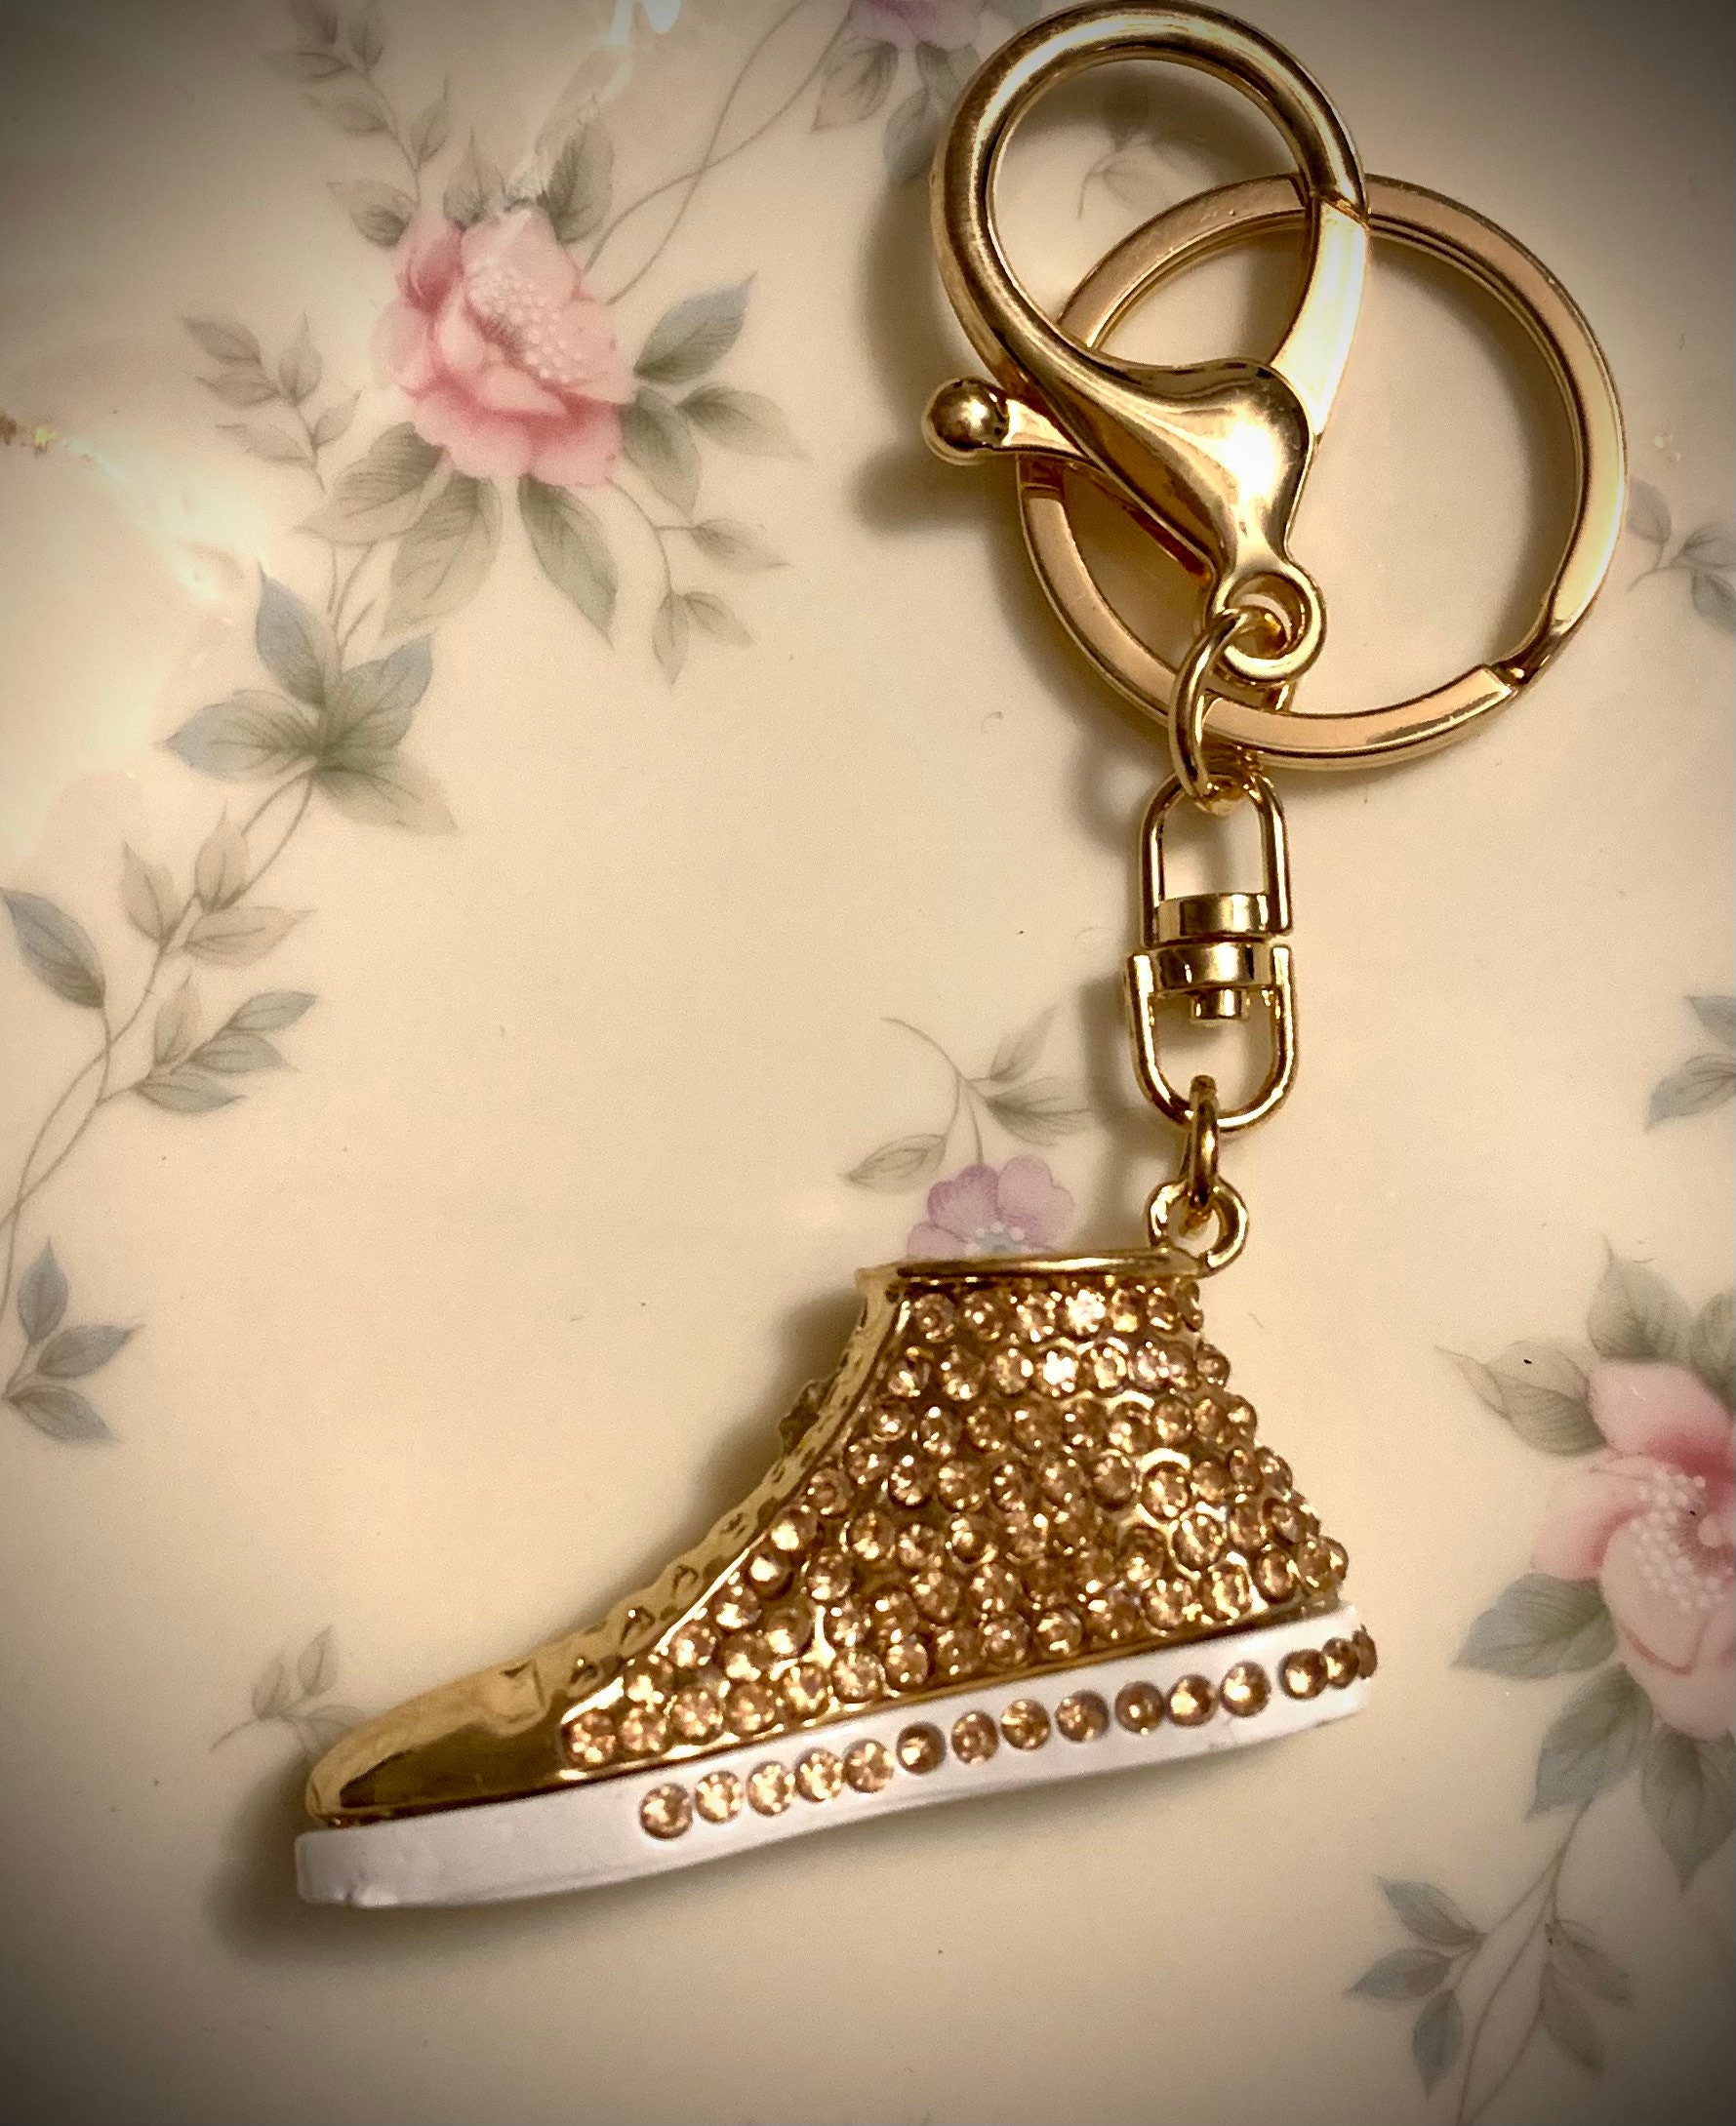 HeartChakraAccents Gold Sneaker and Silver Tassel Keychains